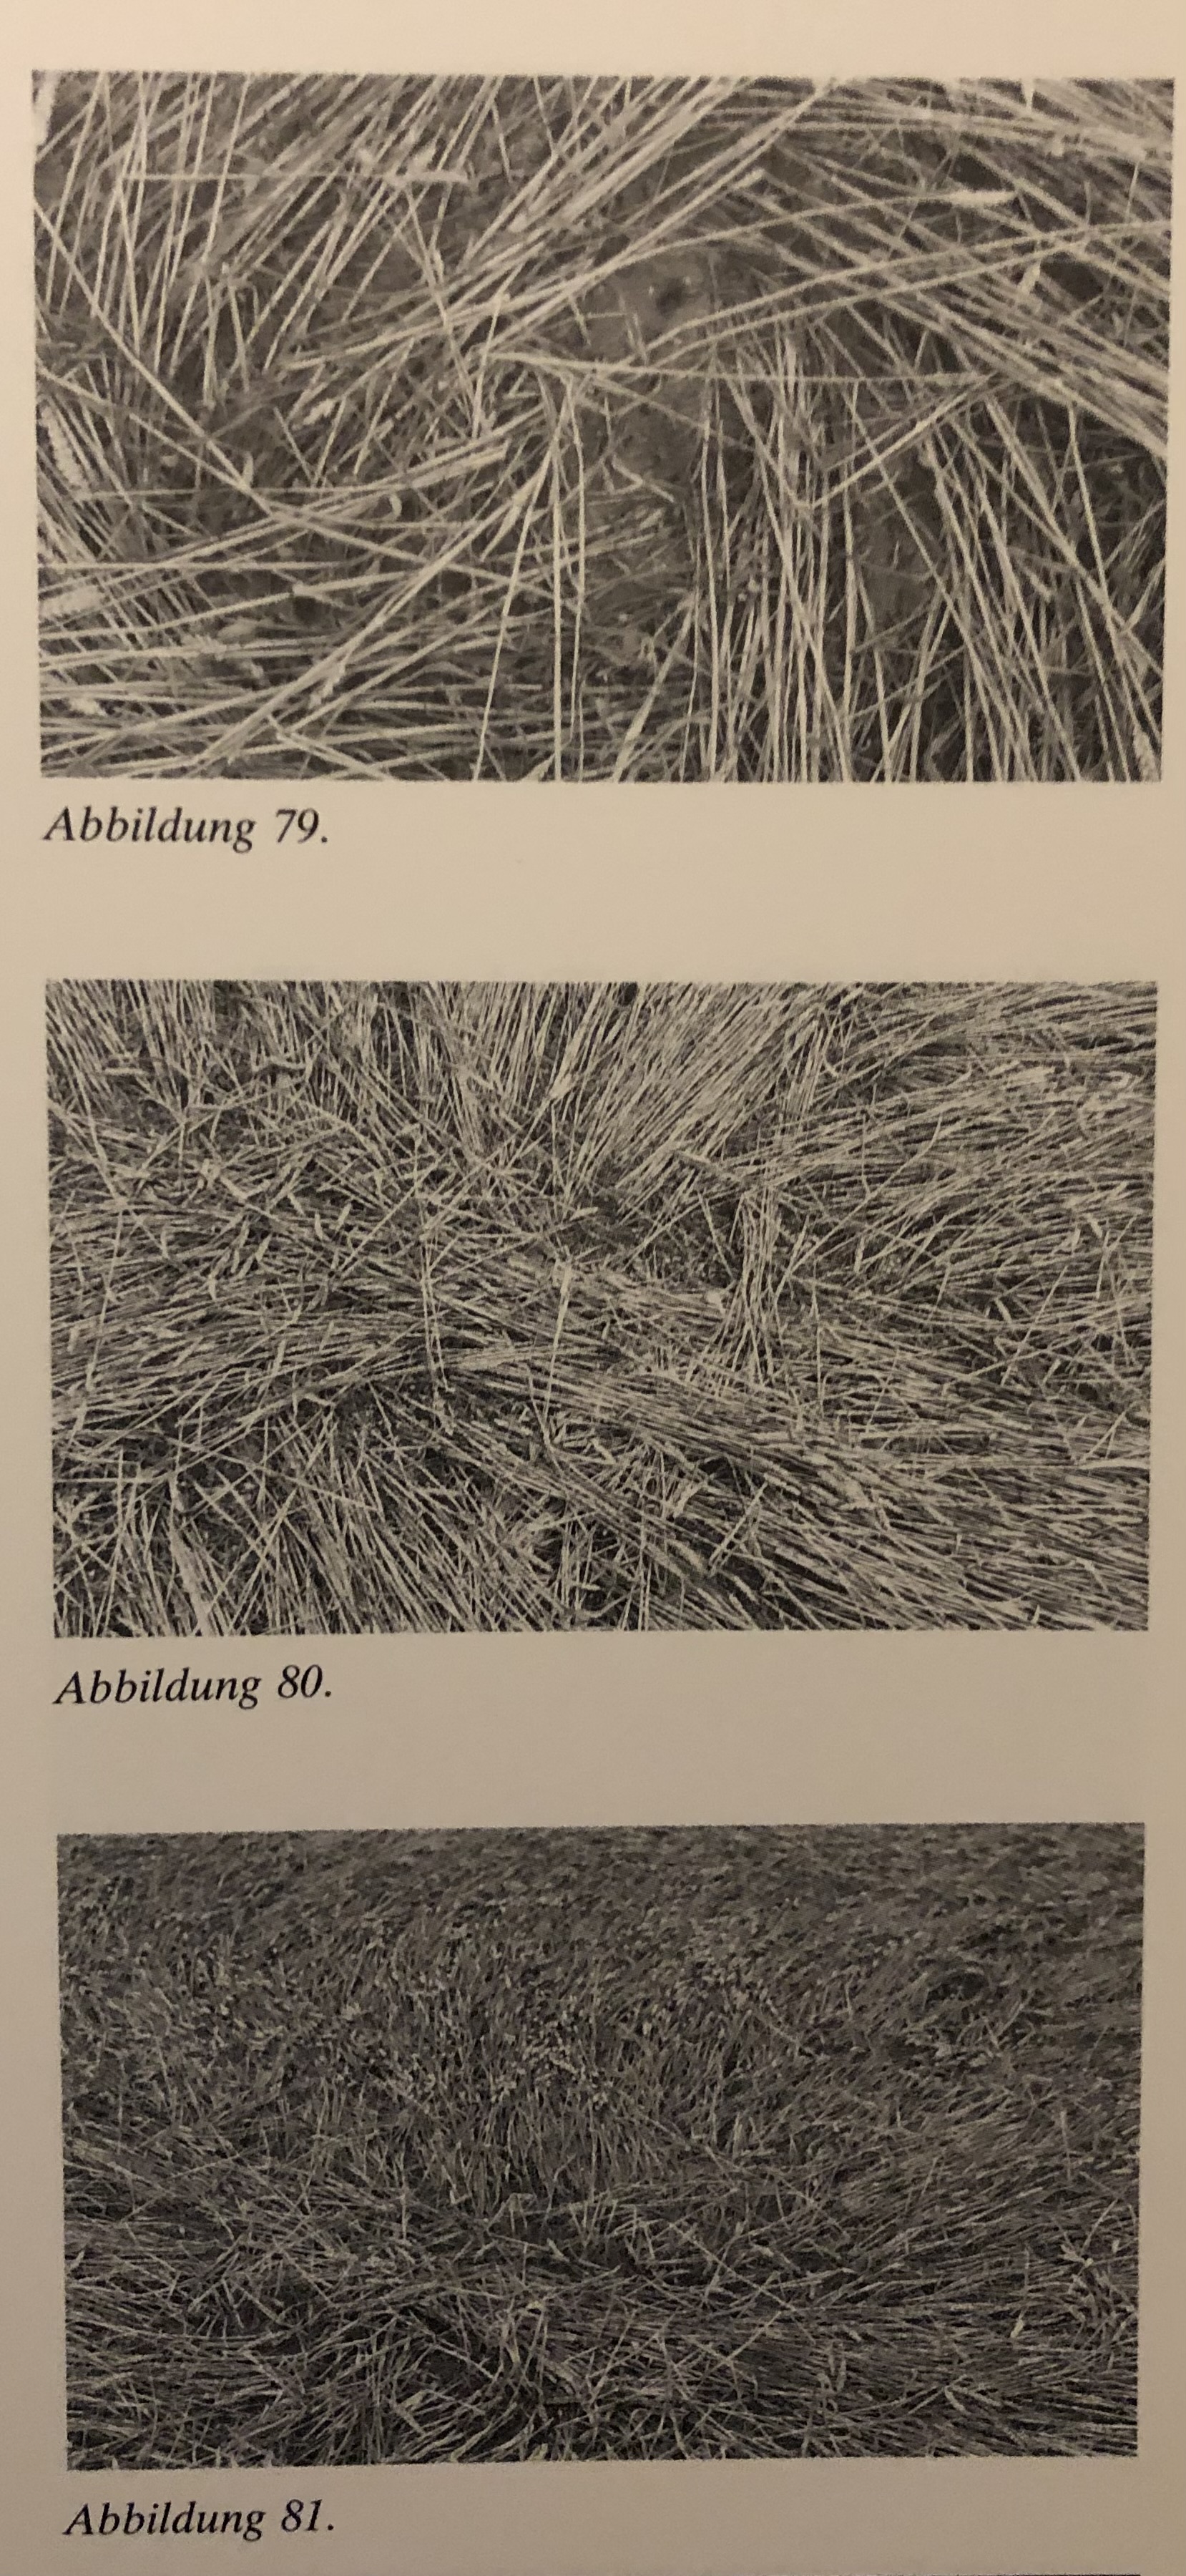 3 sepia photographs aligned vertically on a page labeled 'Abbildung 76.', 'Abbildung 77.', 'Abbildung 78.' depicting a variety of up close aerial shots of wheat flattened in a pattern that swirls out in a circular motion from a center point. 